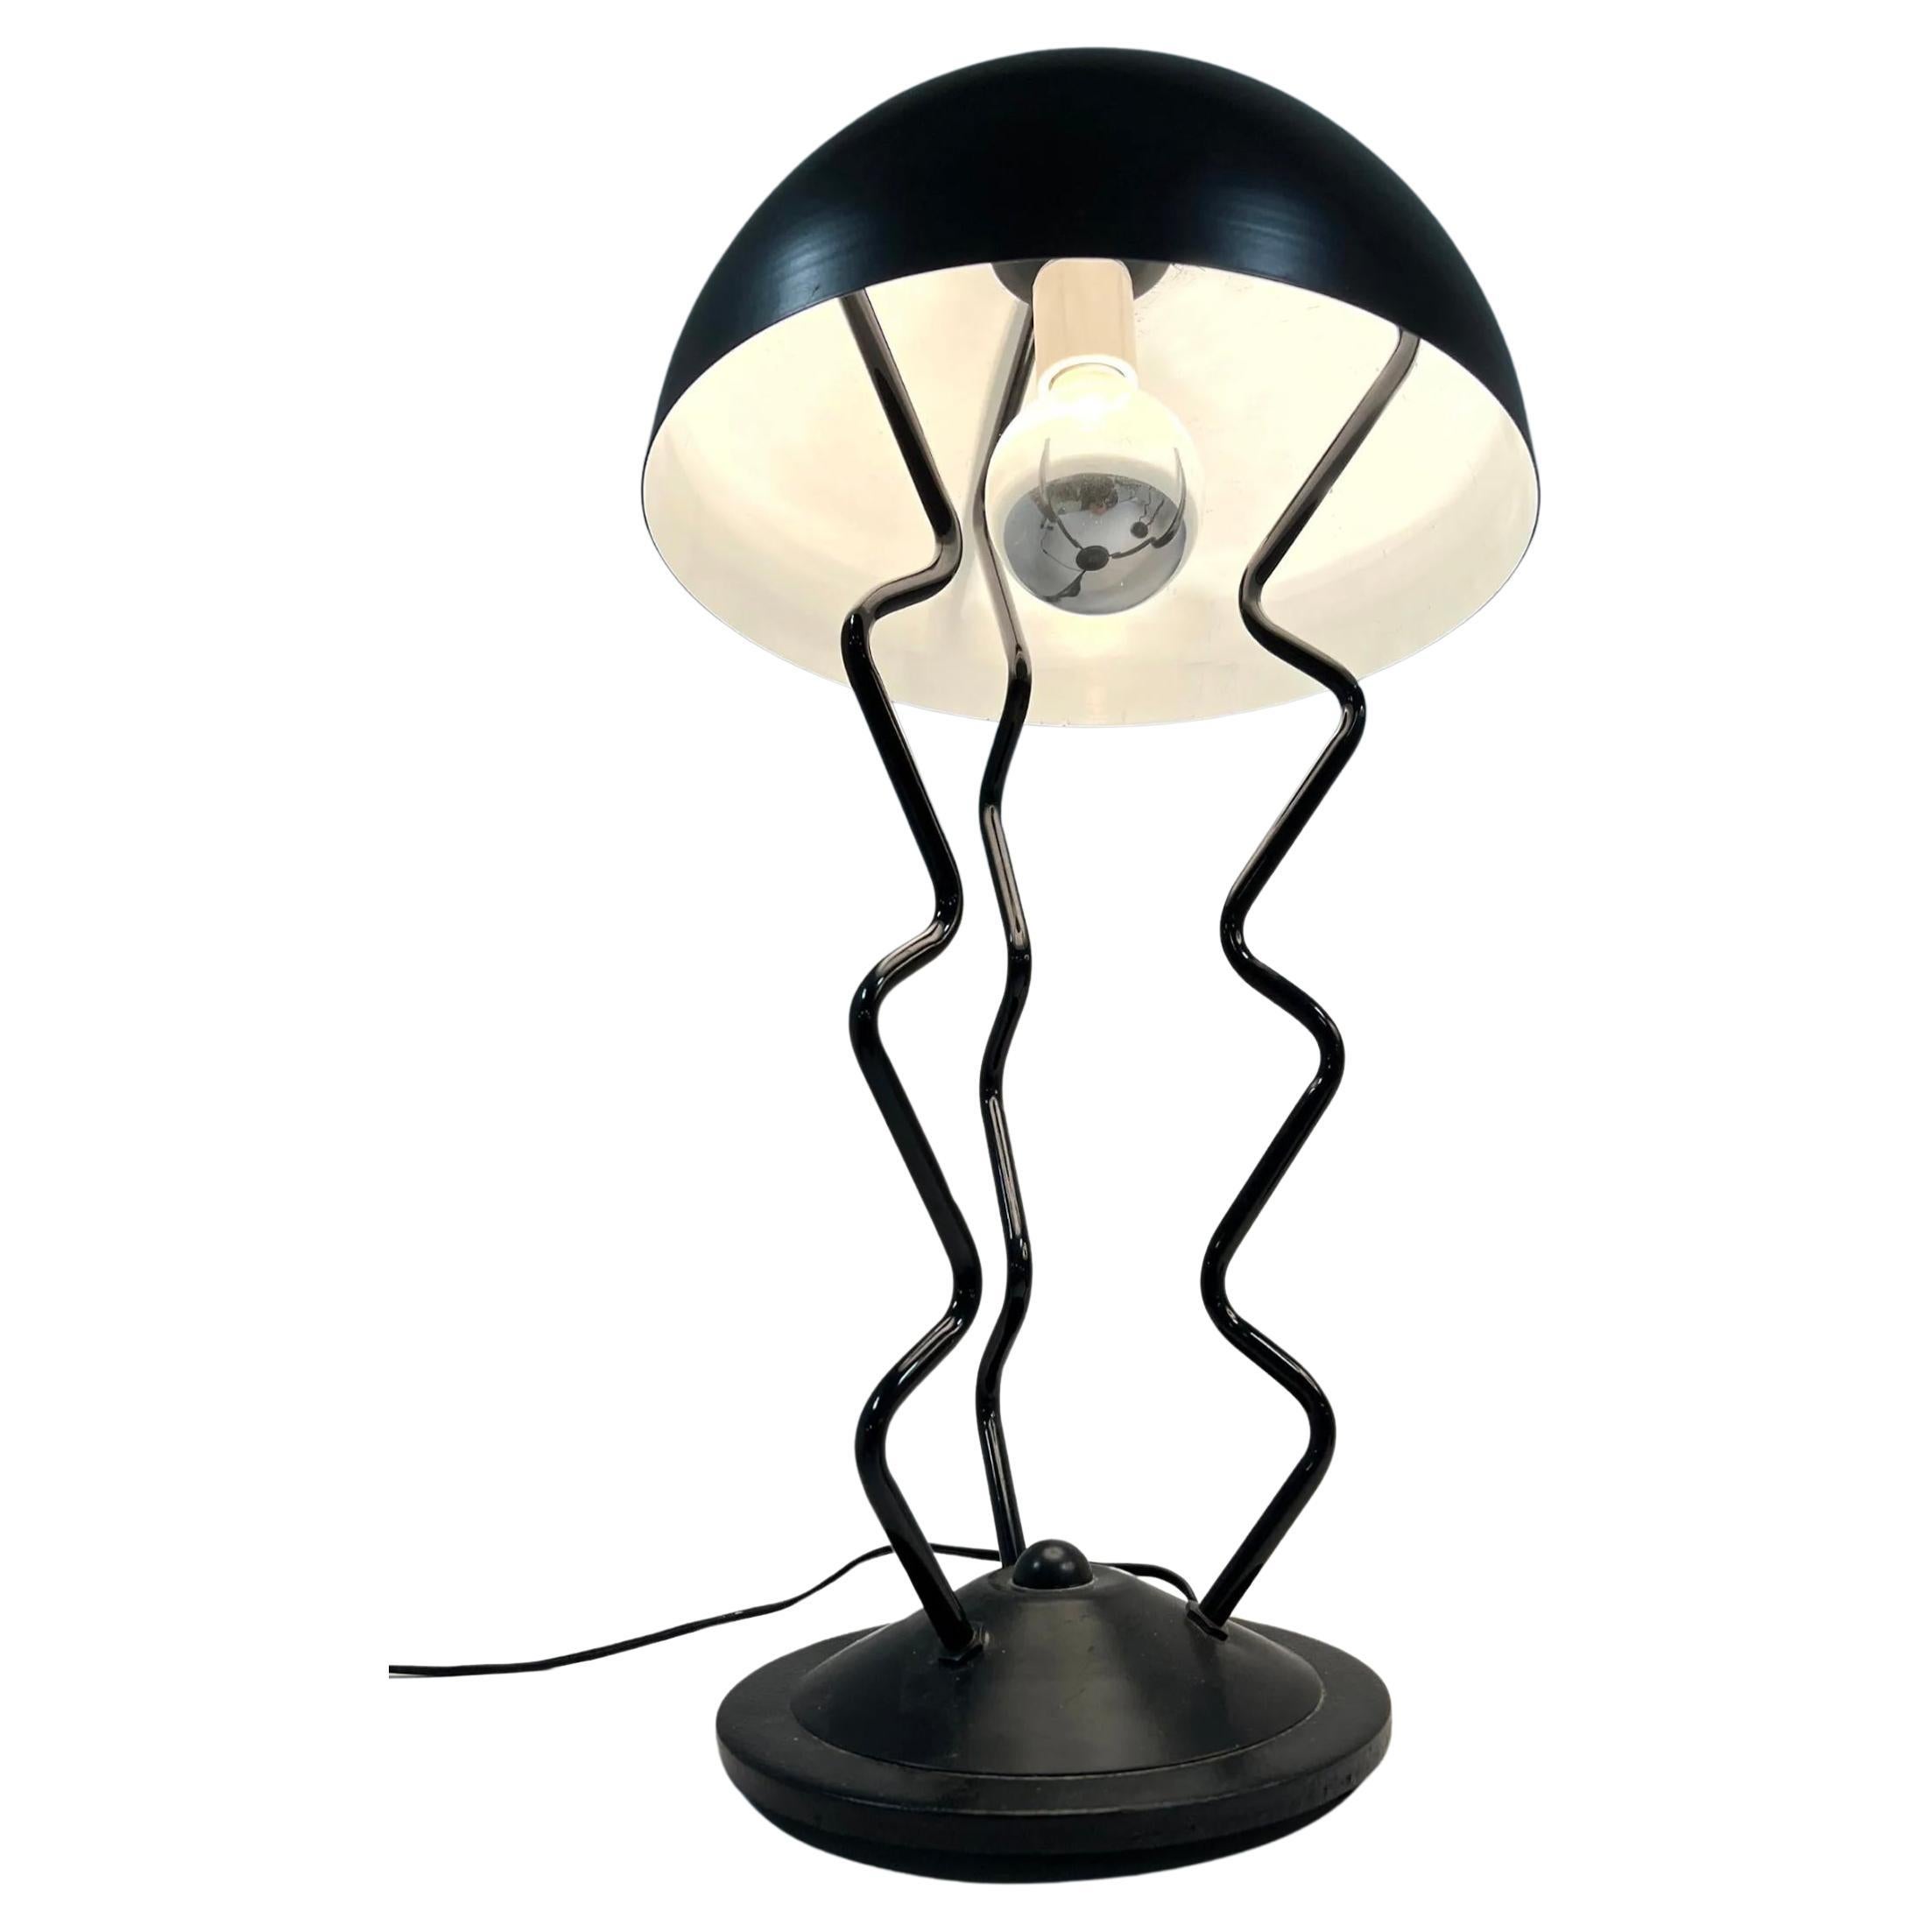 squiggly lamp